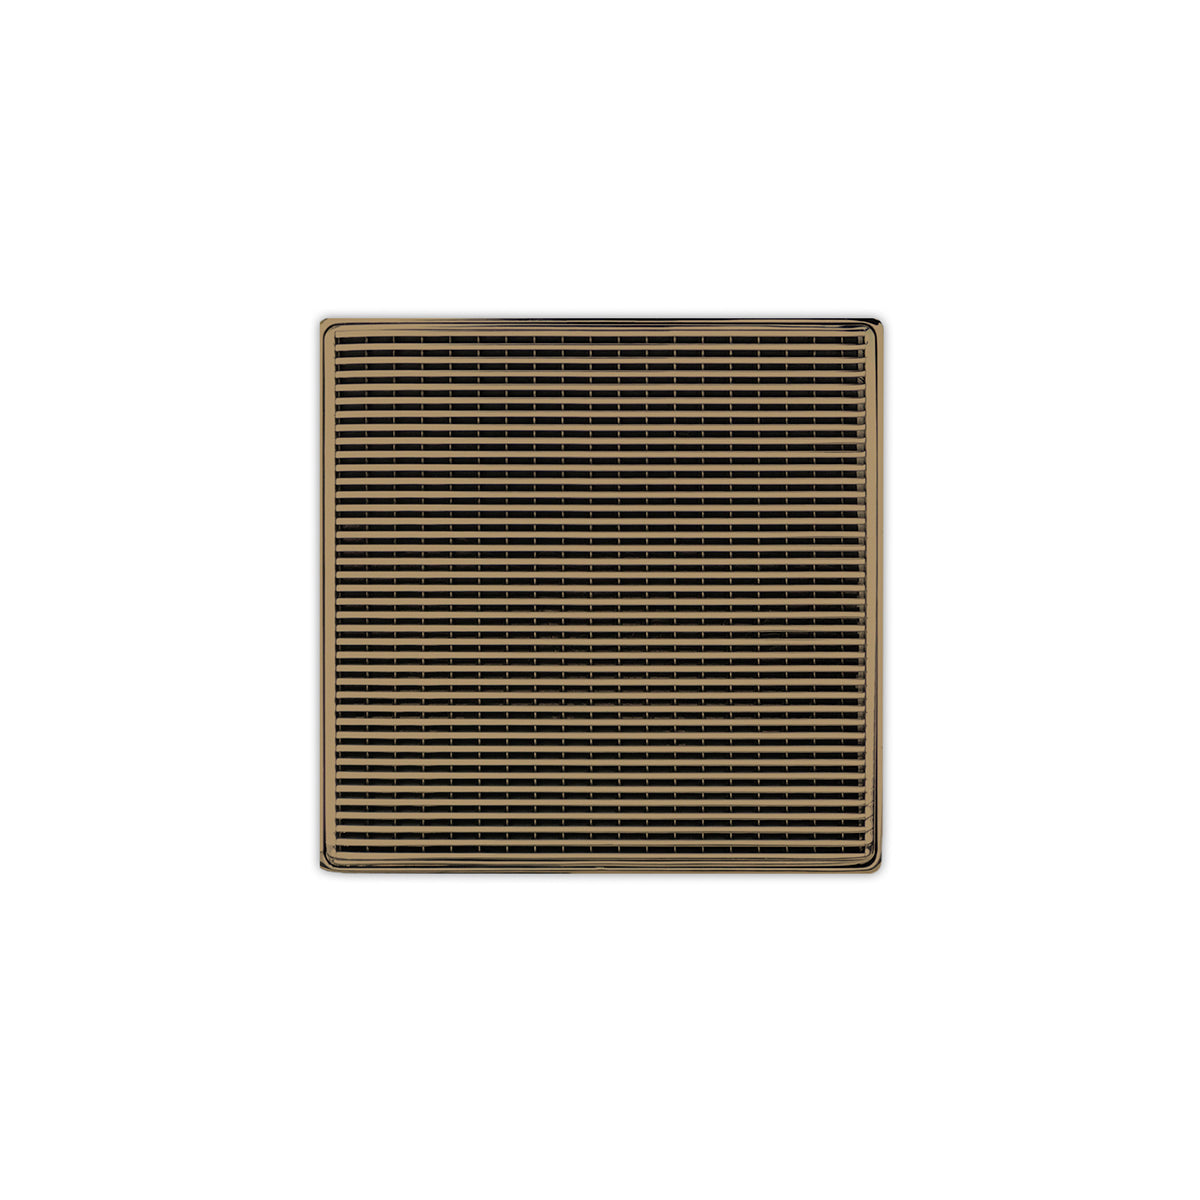 Infinity Drain 5" x 5" Strainer Premium Center Drain Kit with Wedge Wire Pattern Decorative Plate and 2" Throat for WD 5